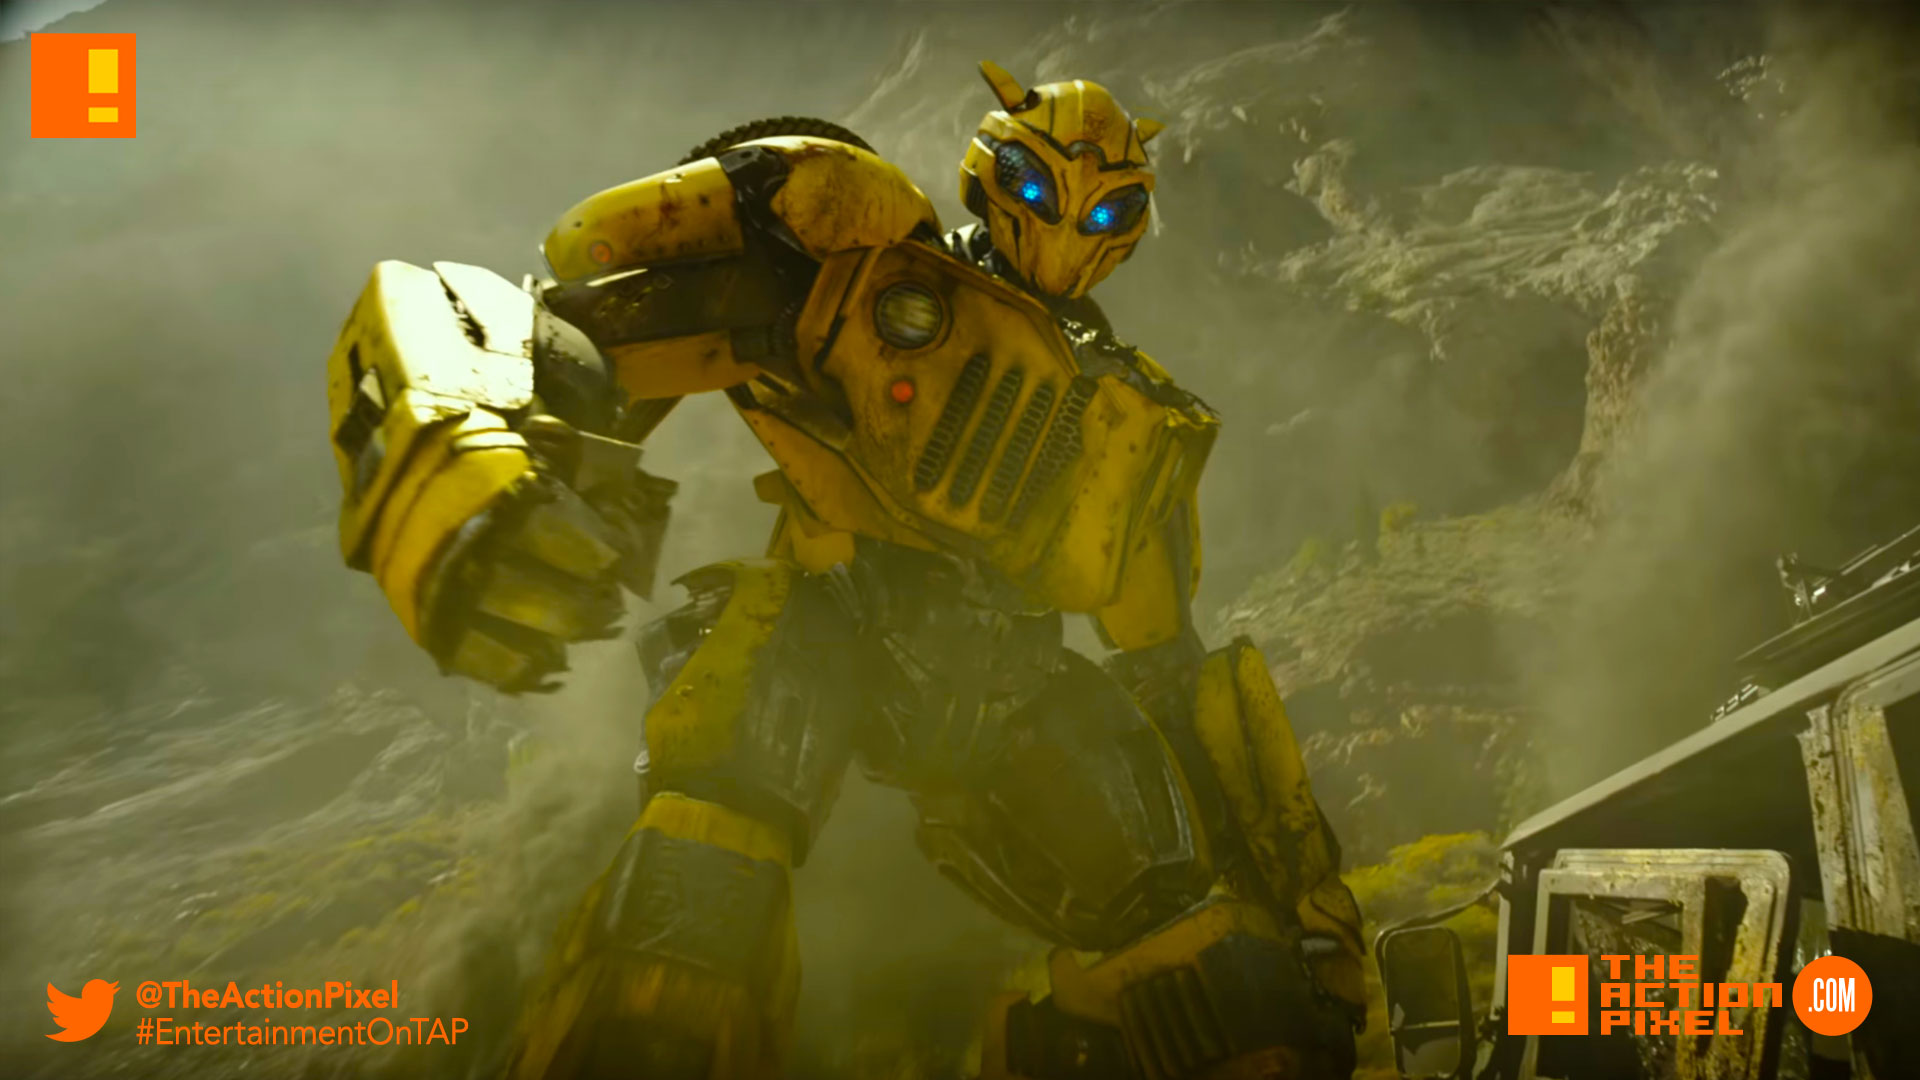 transformers, paramount pictures, Bumblebee, Hailee Steinfeld ,John Cena, Travis Knight ,Bumblebee Movie, the action pixel, entertainment on tap